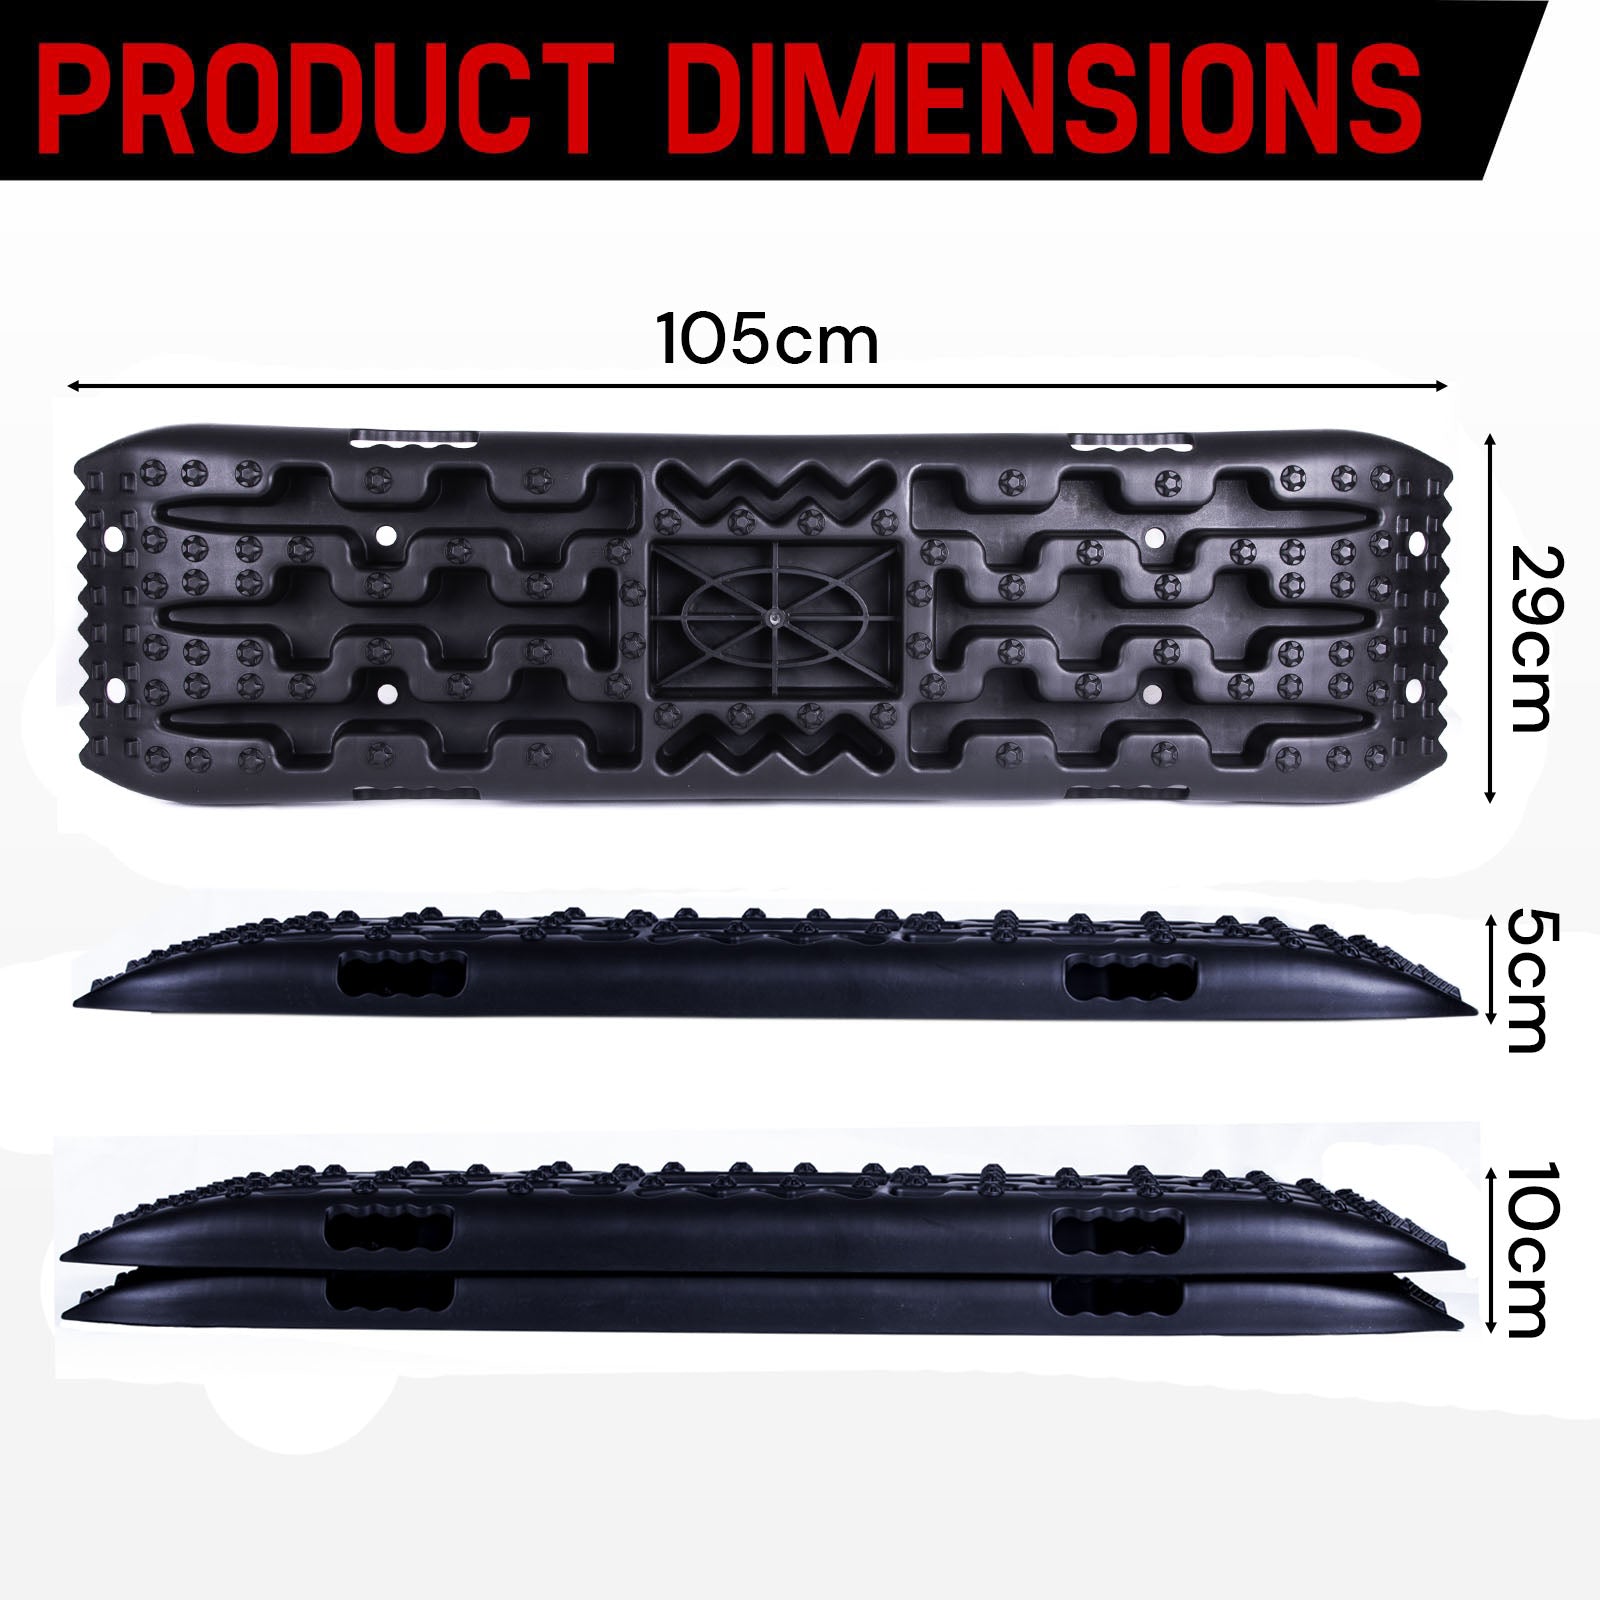 Traction Boards 2 PCS Recovery Tracks with Jack Base 4WD Tire Traction Mat Recovery Boards Rescue Board - SILBERSHELL